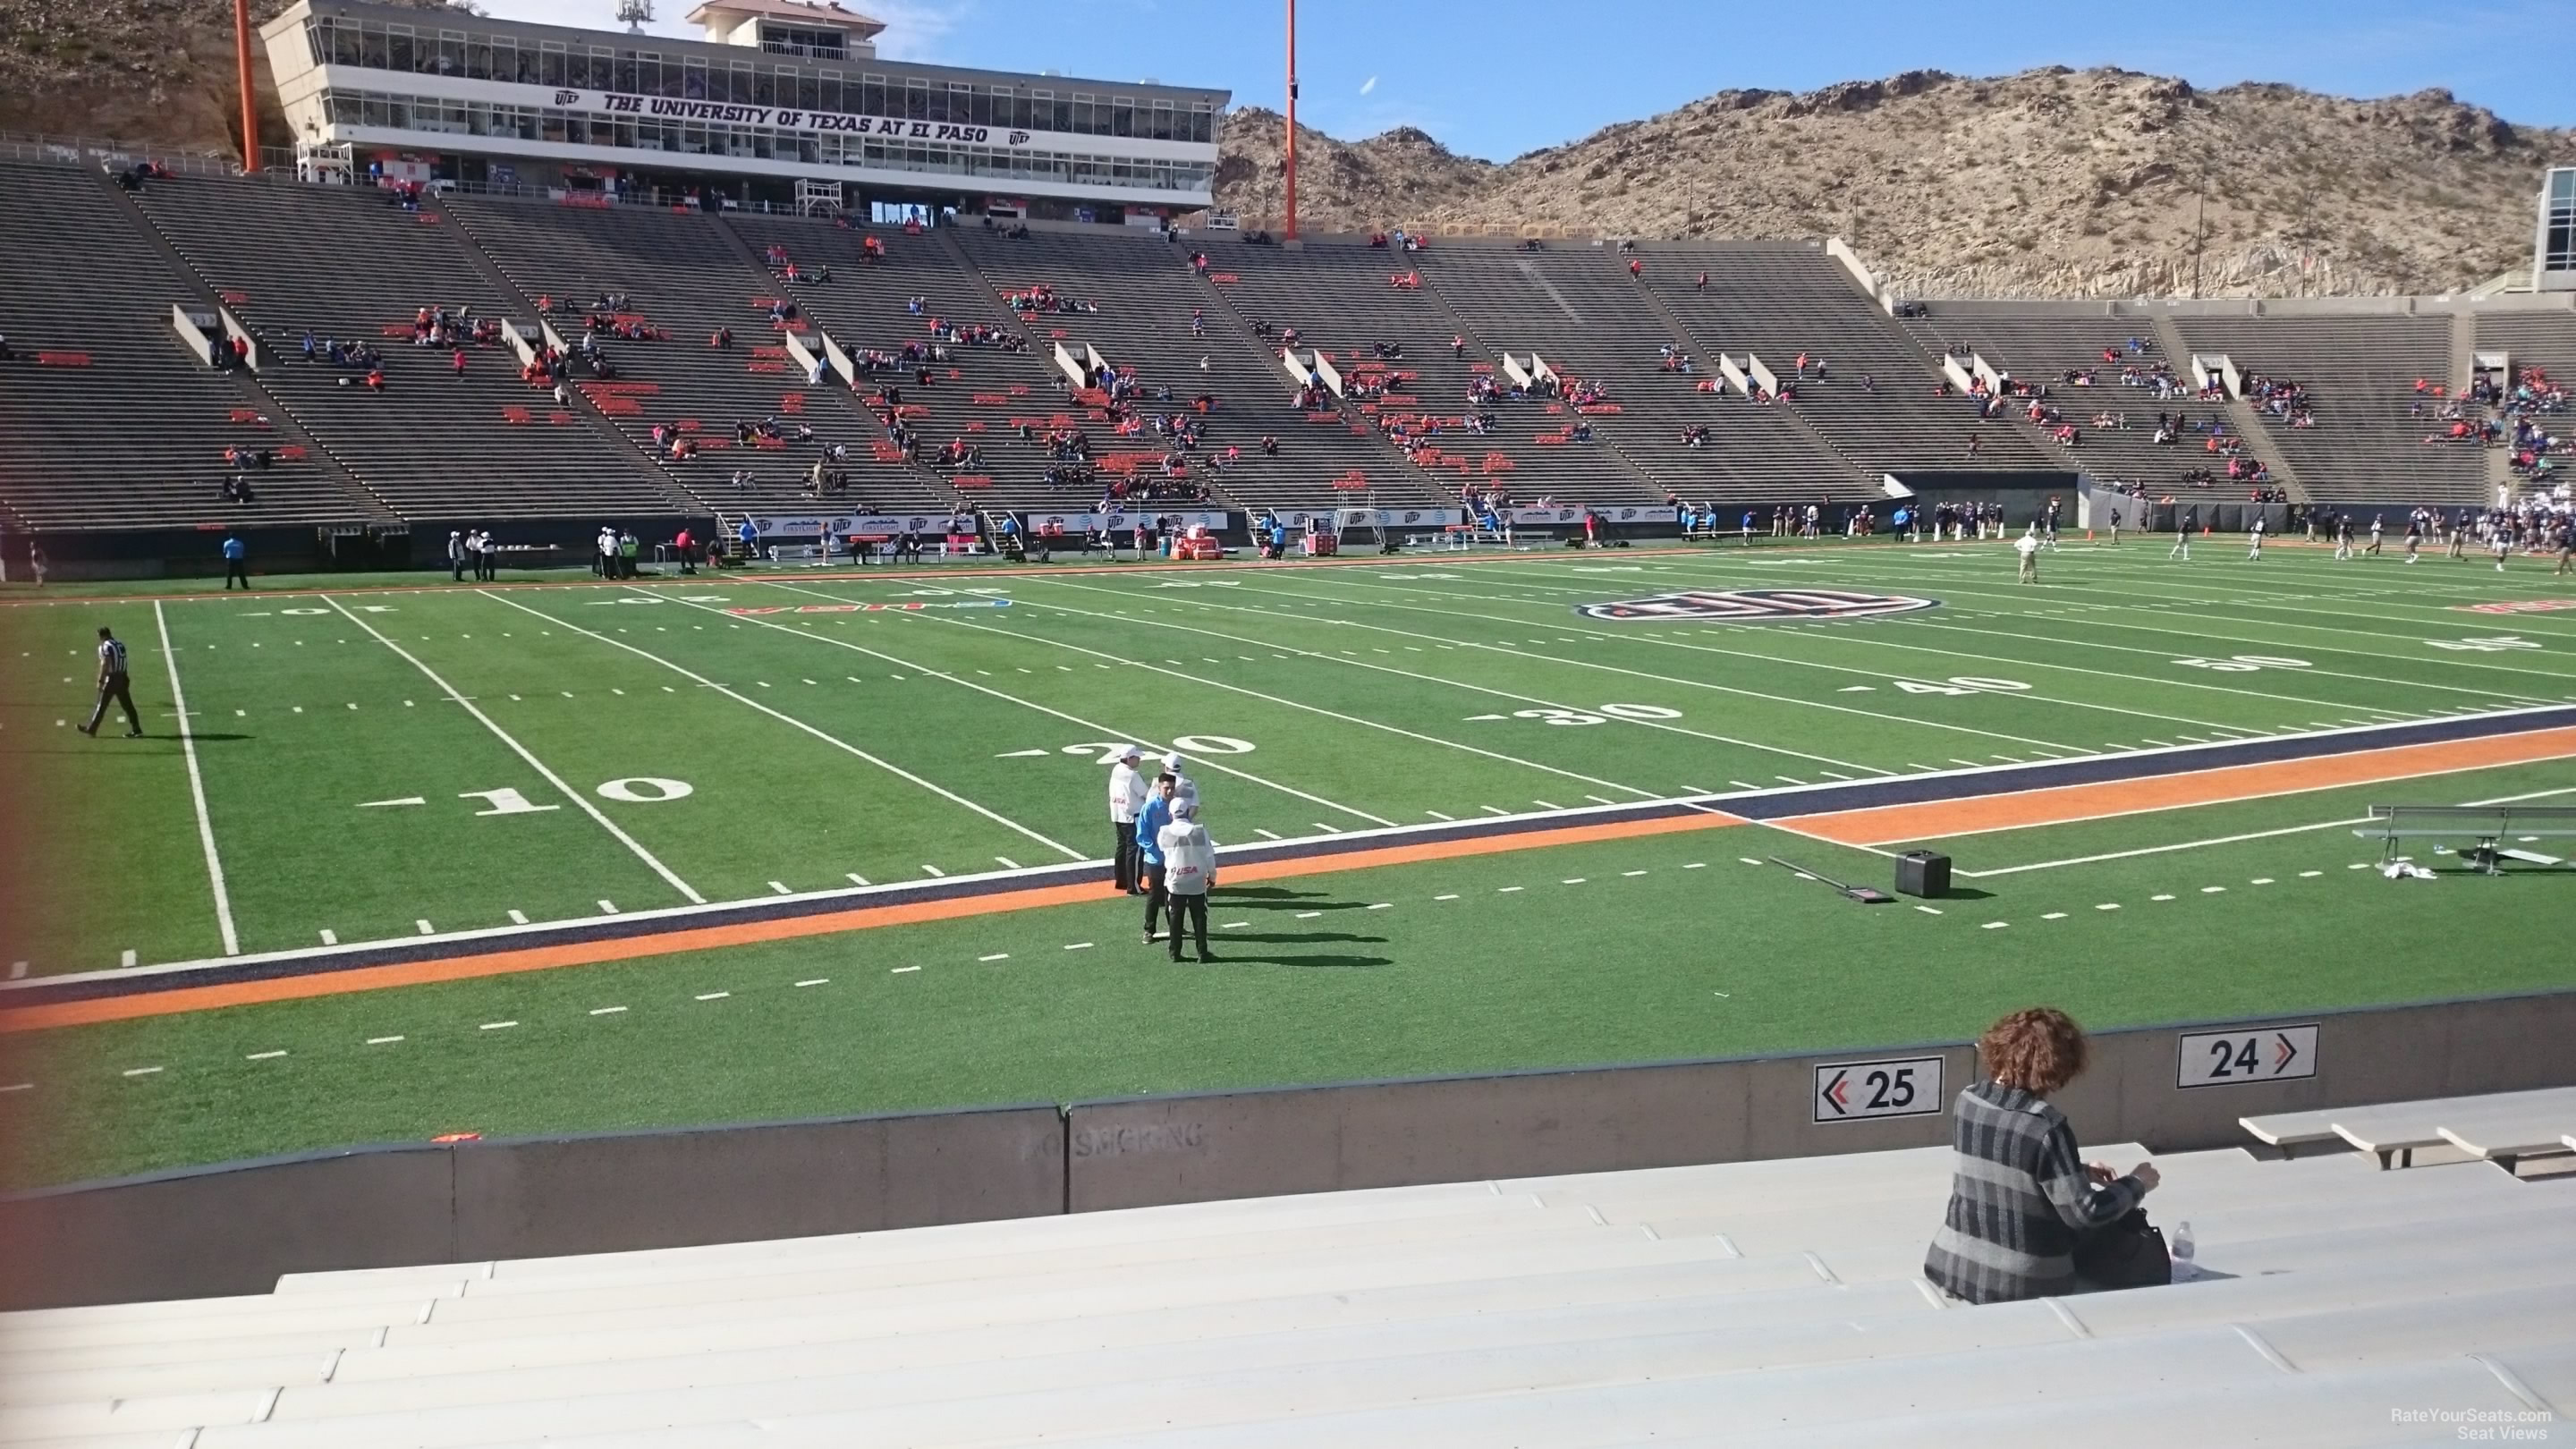 section 25, row 15 seat view  for football - sun bowl